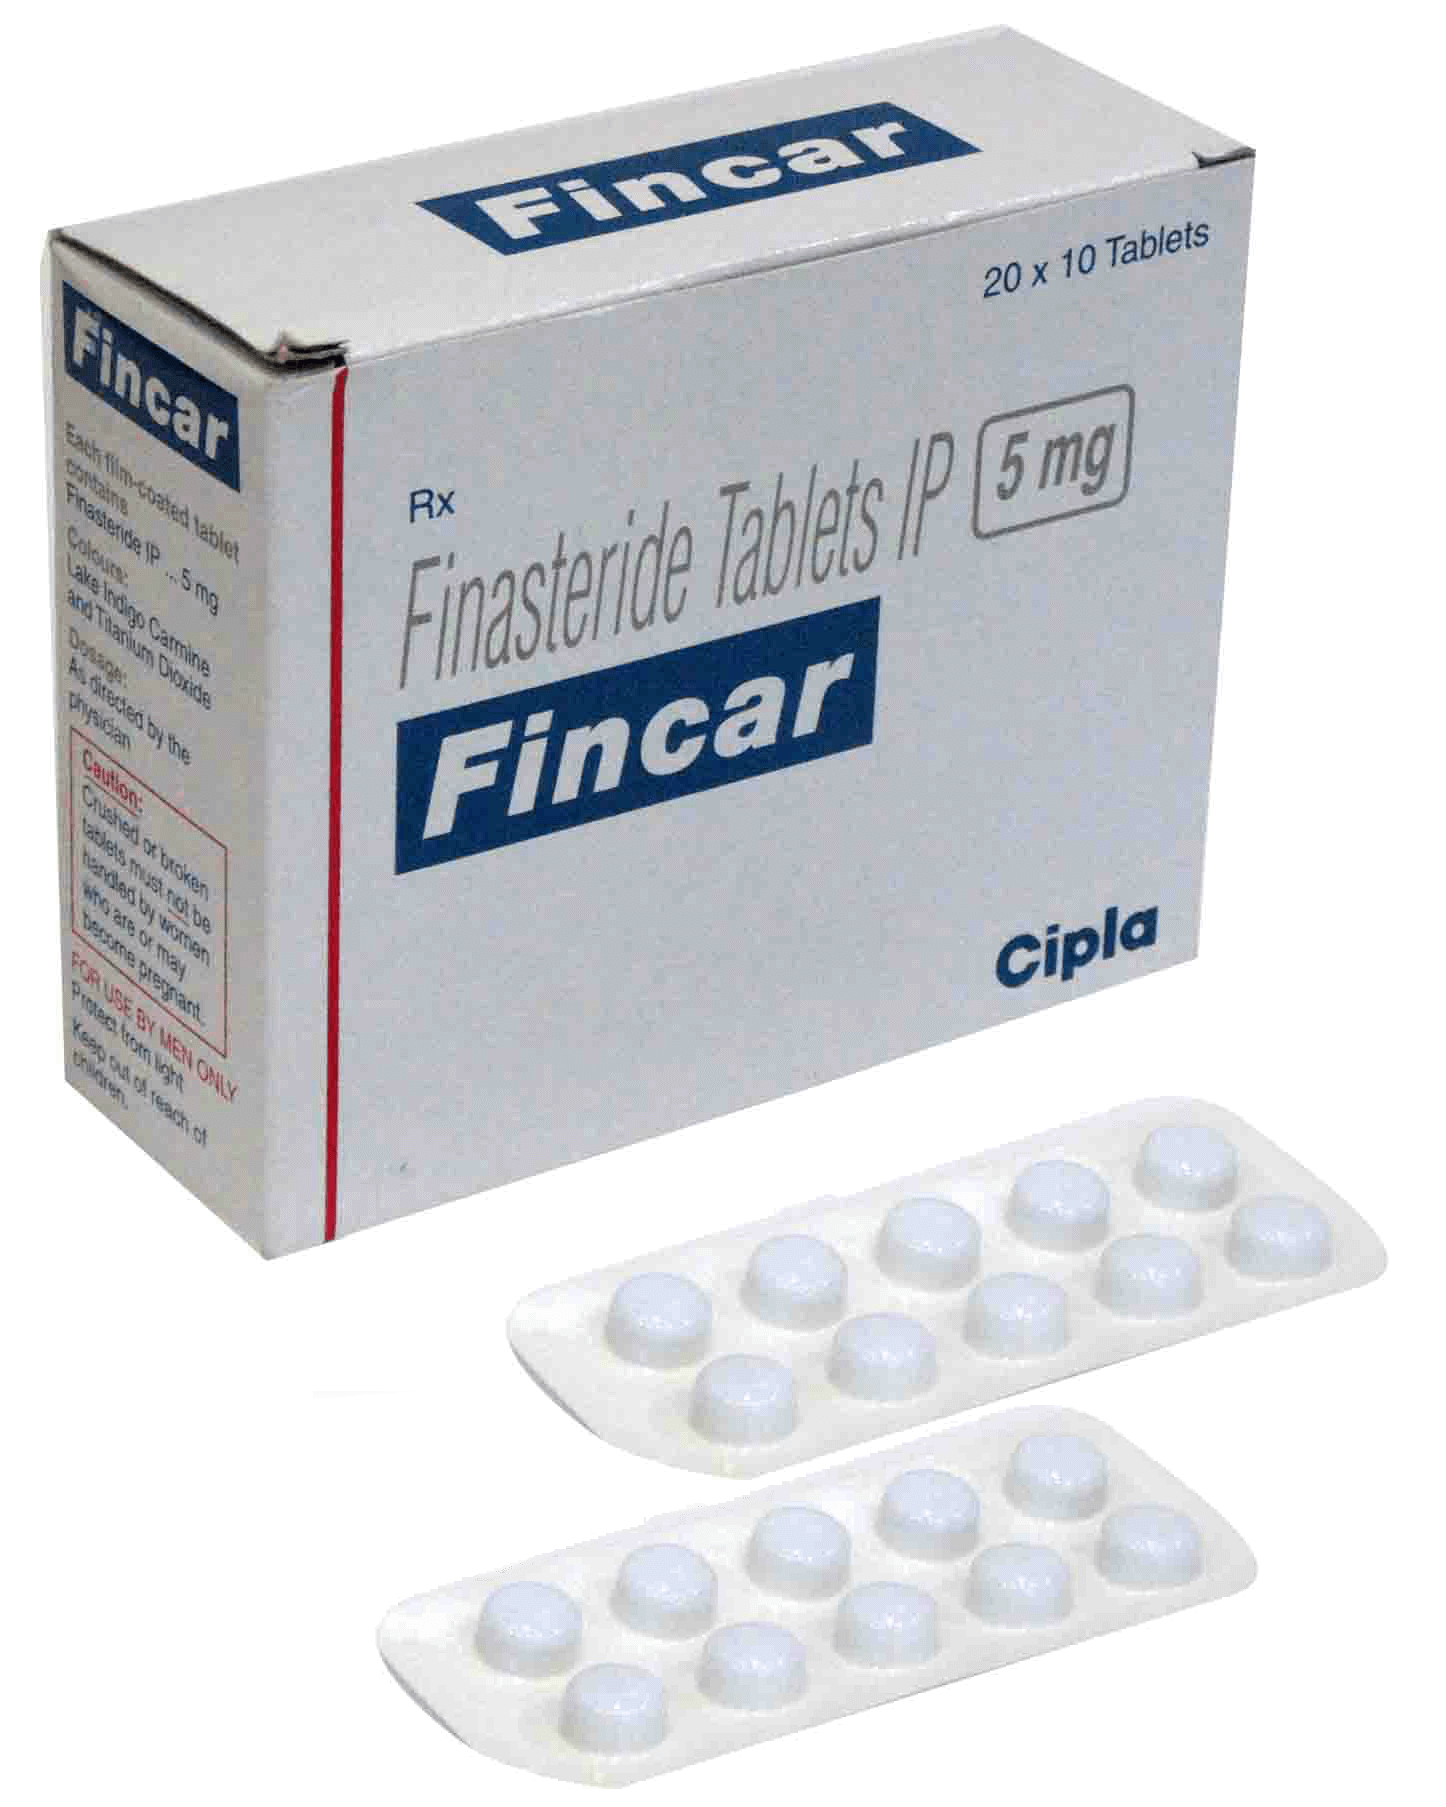 is finasteride safe for hair loss